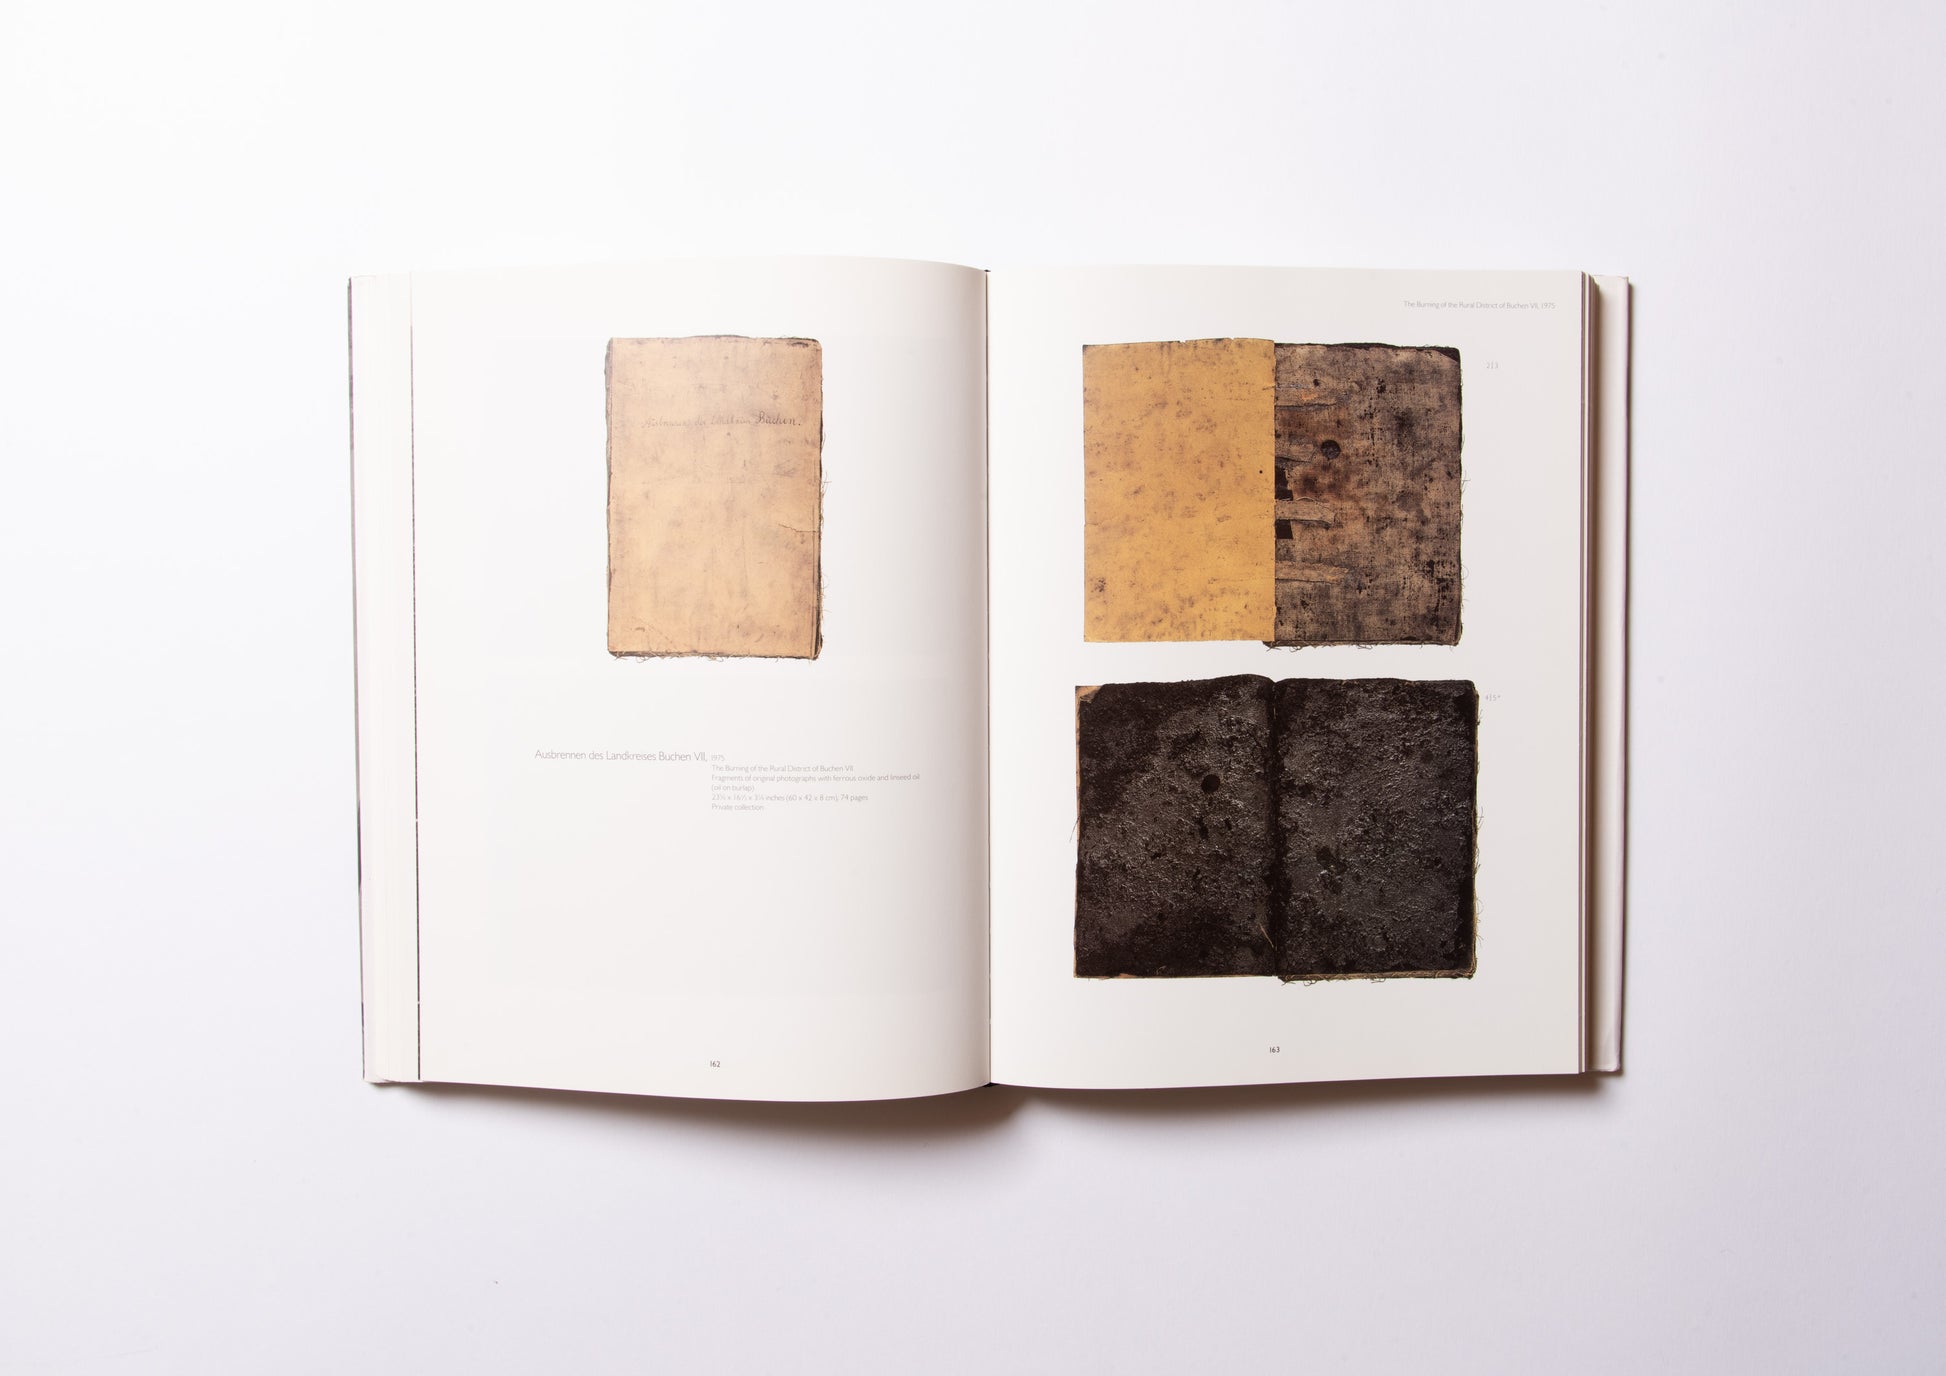 The Books of Anselm Kiefer